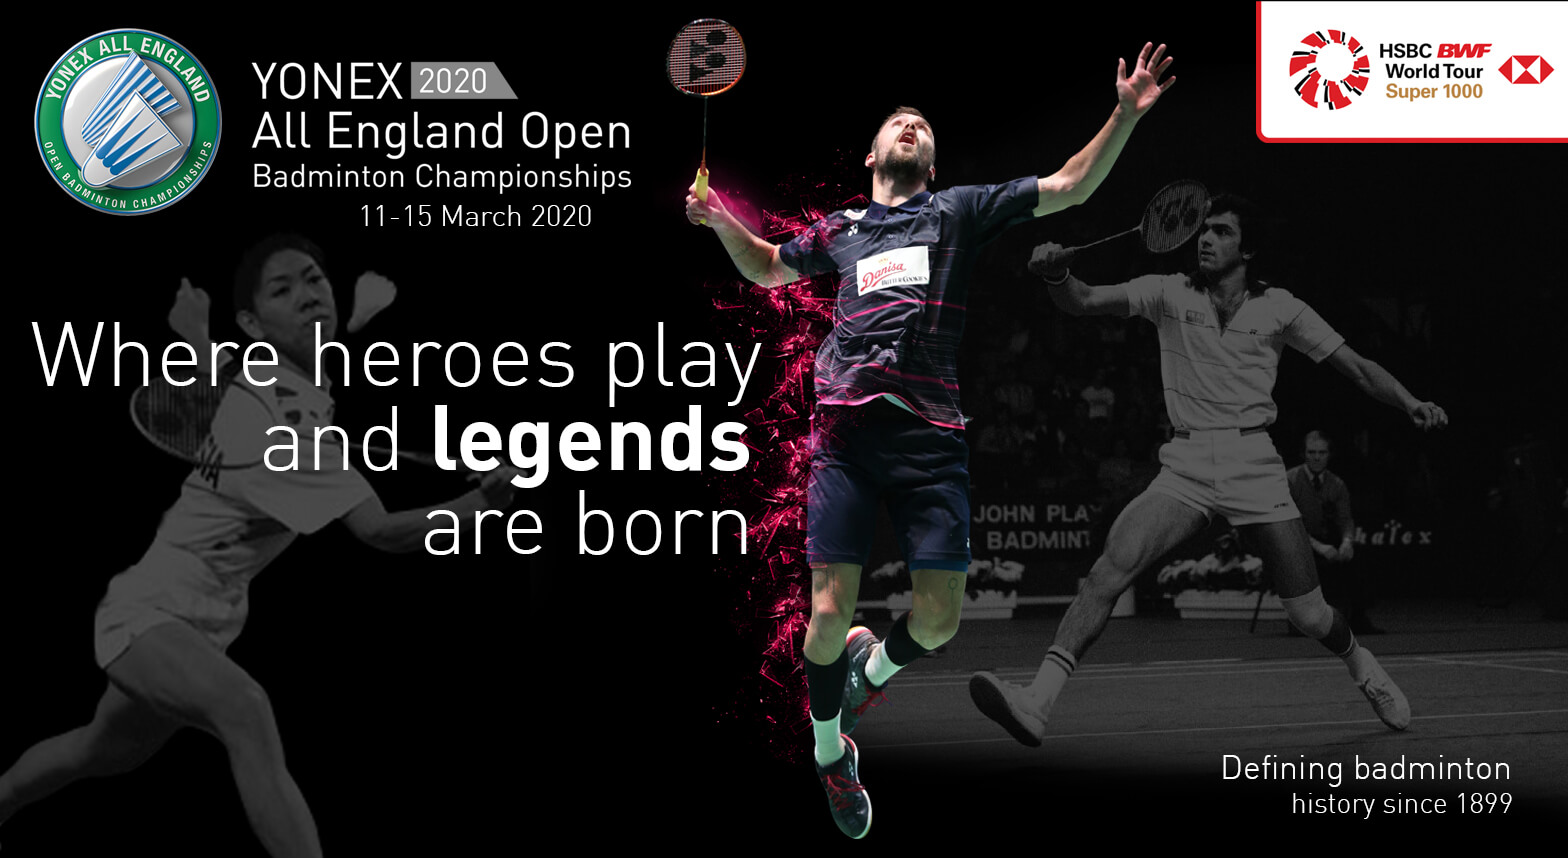 Live streaming all england. All England. Live streaming Badminton all England. Modern Badminton in the uk.